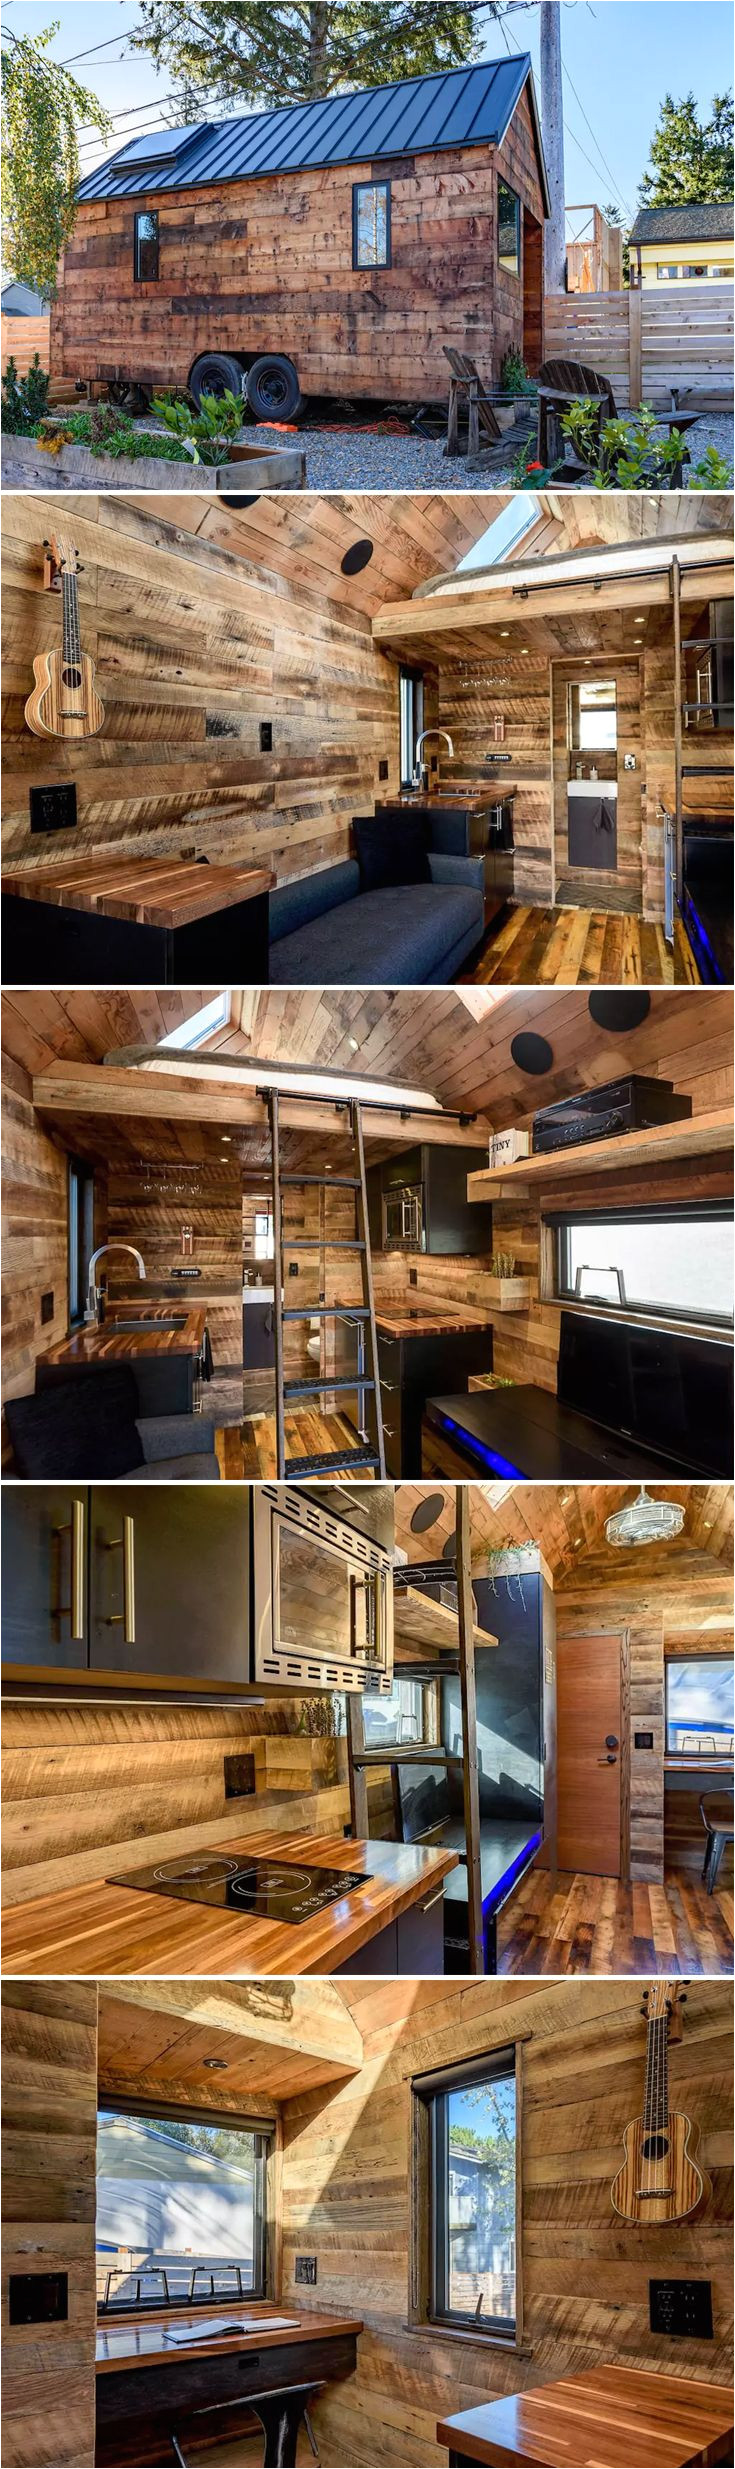 designed and built by chad kuntz tipsy the tiny house is a 180 sq